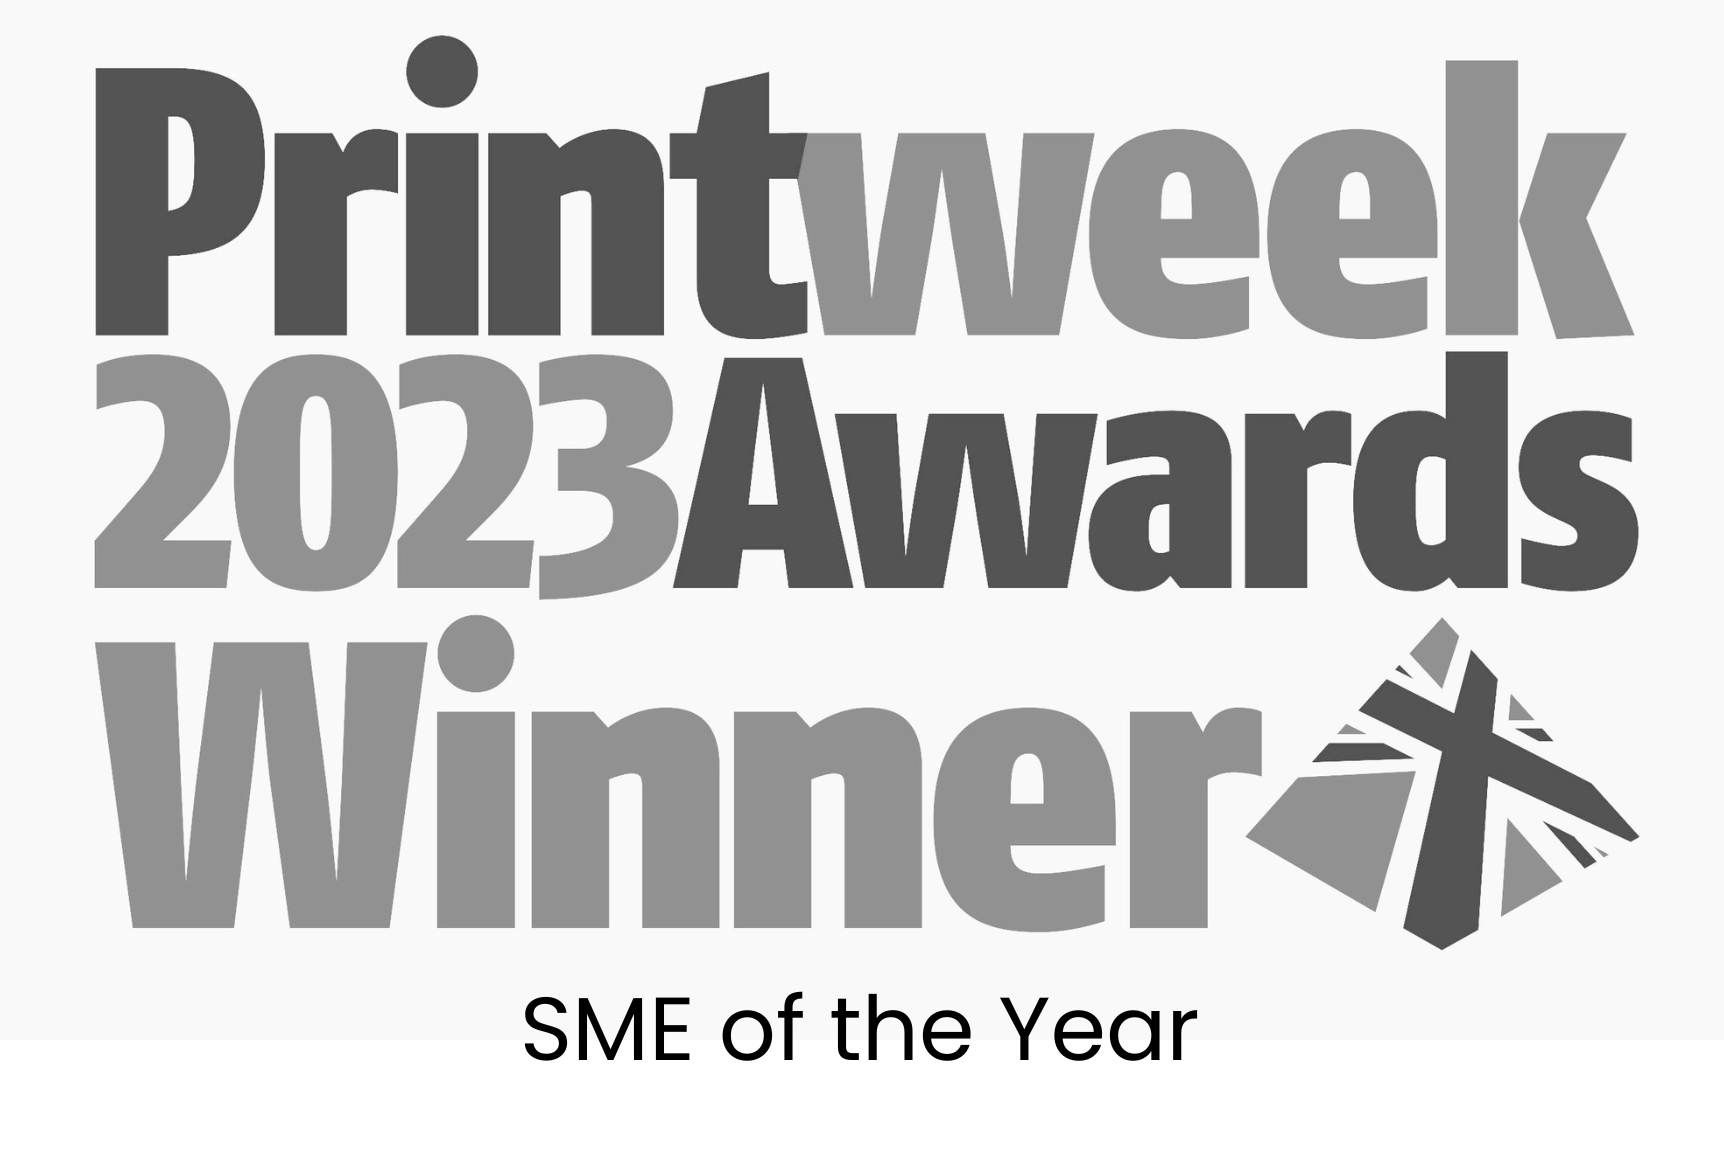 sme-of-the-year-13